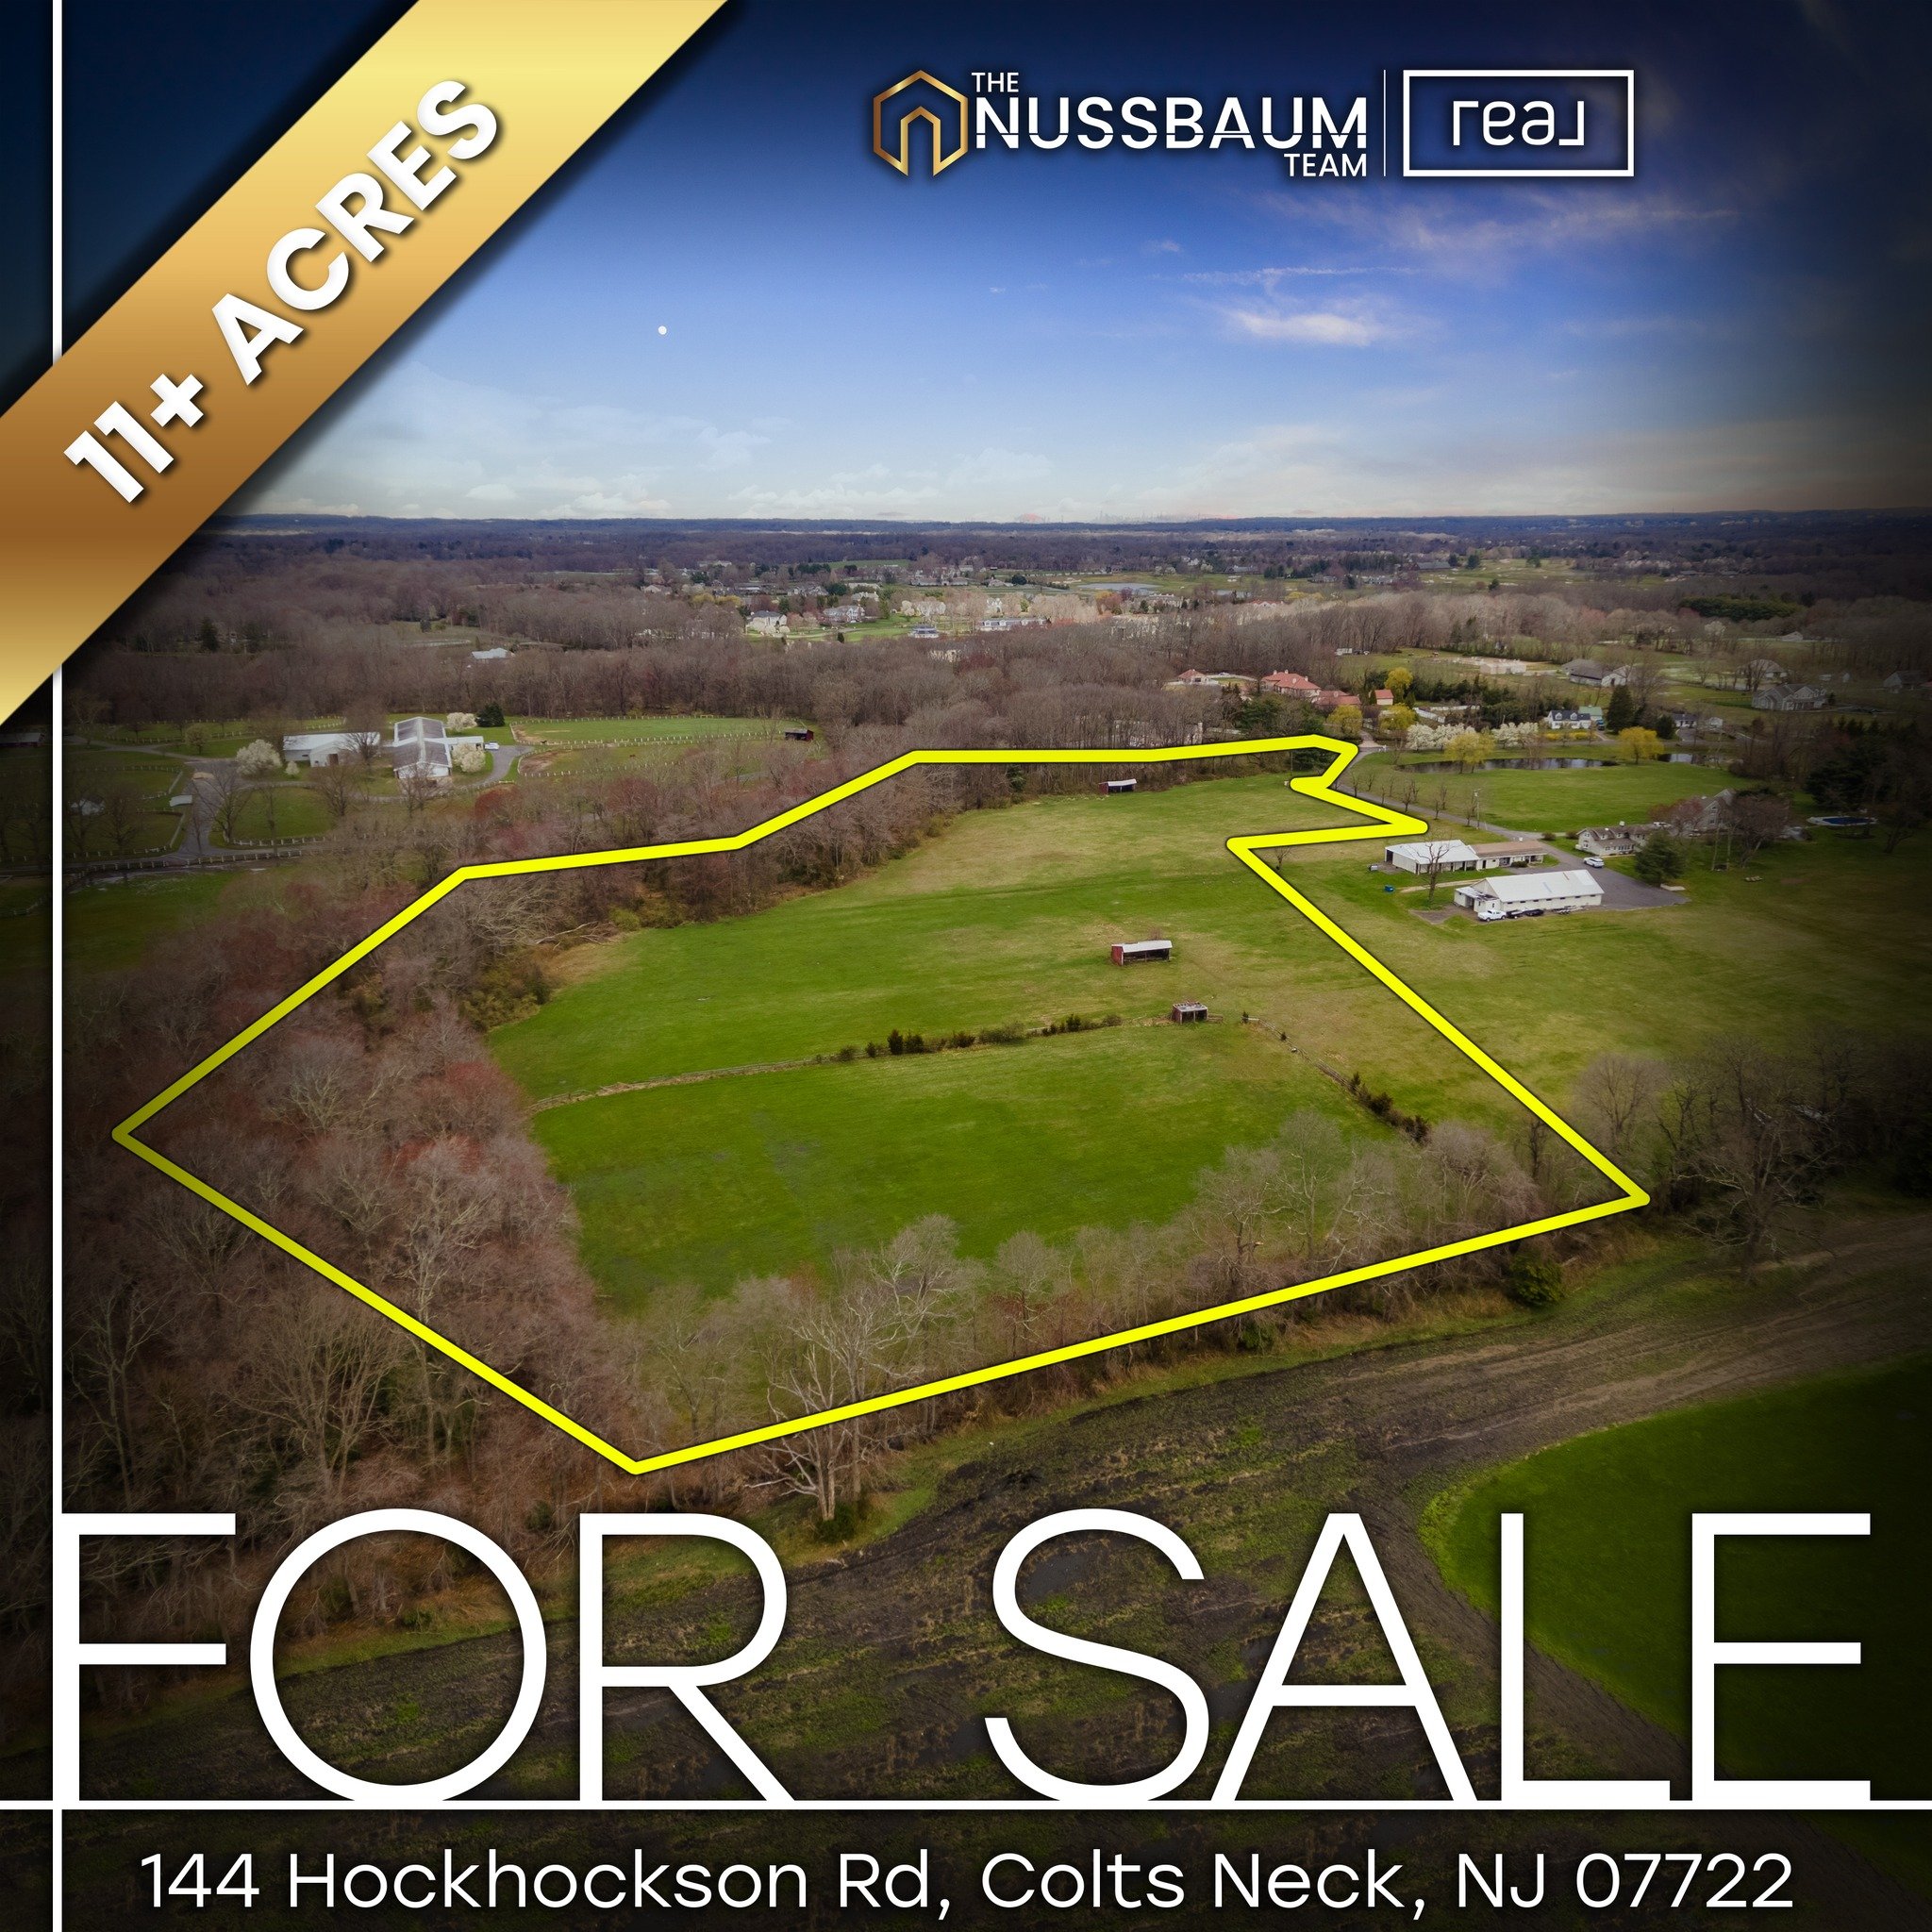 💥11+ ACRES FOR SALE💥
📍 144 Hockhockson Rd, Colts Neck, NJ 07722

Asking: $1,295,000

Nestled within prestigious Colts Neck, New Jersey, awaits a luxurious sanctuary soon to be erected at 144 Hockhockson Rd. Embraced by the serene beauty of sprawli